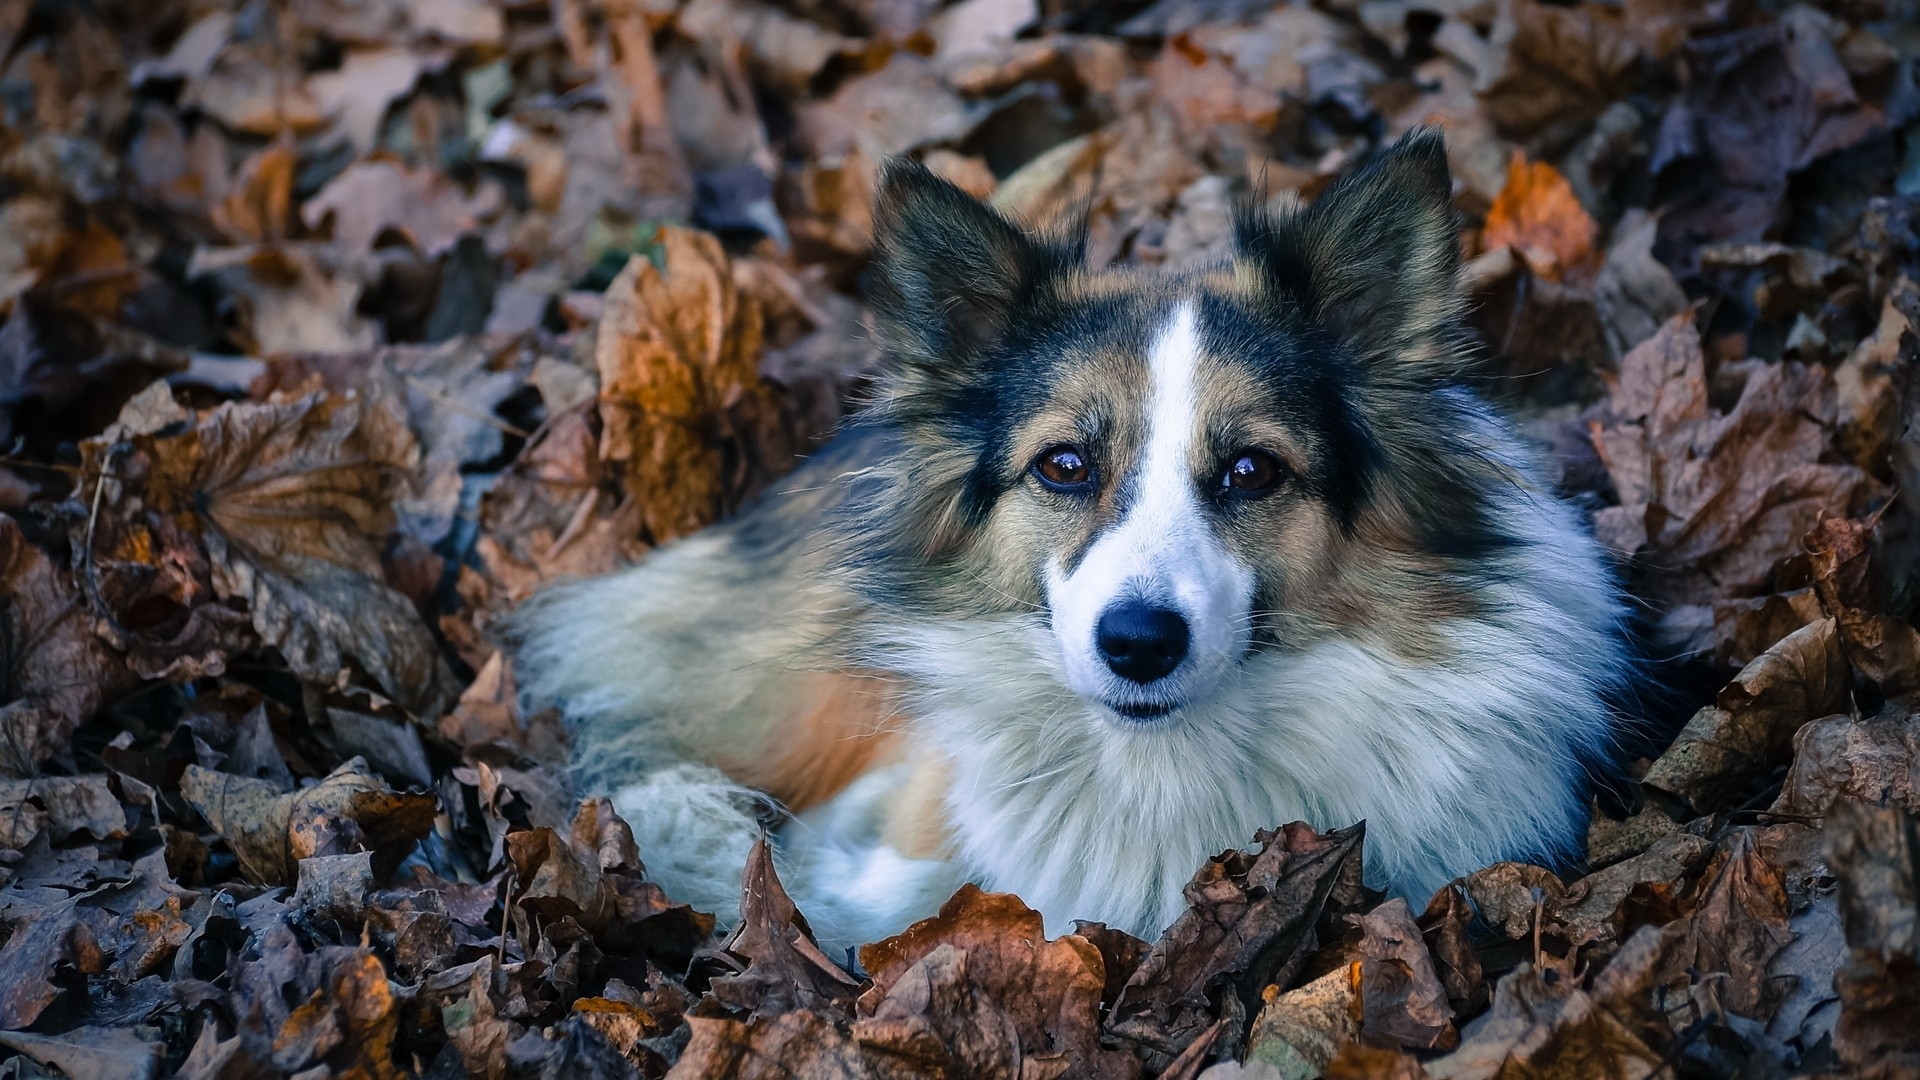 The dog is lying in dry leaves.